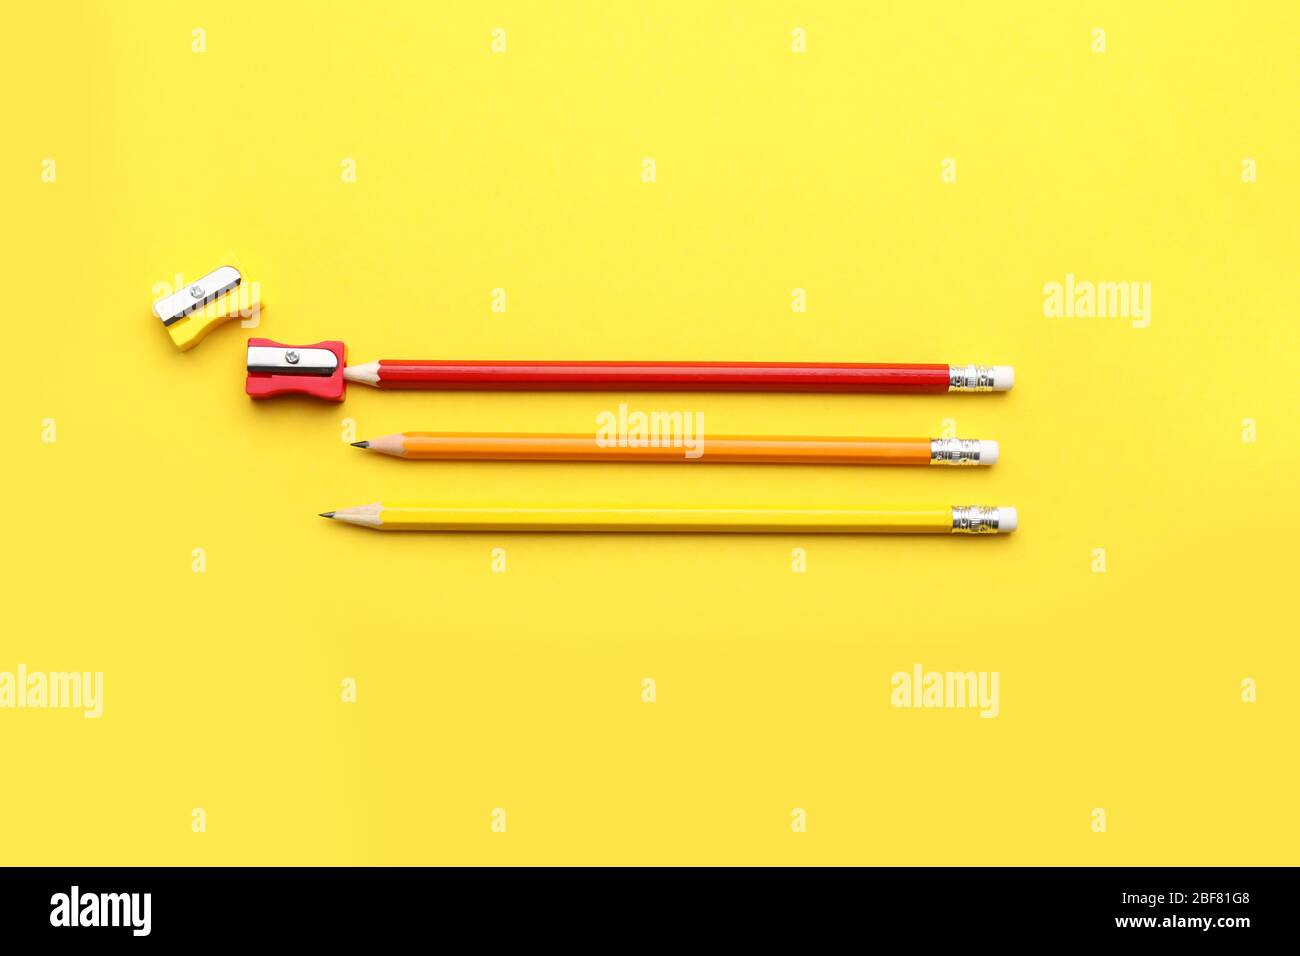 Ordinary pencils and sharpeners on color background Stock Photo